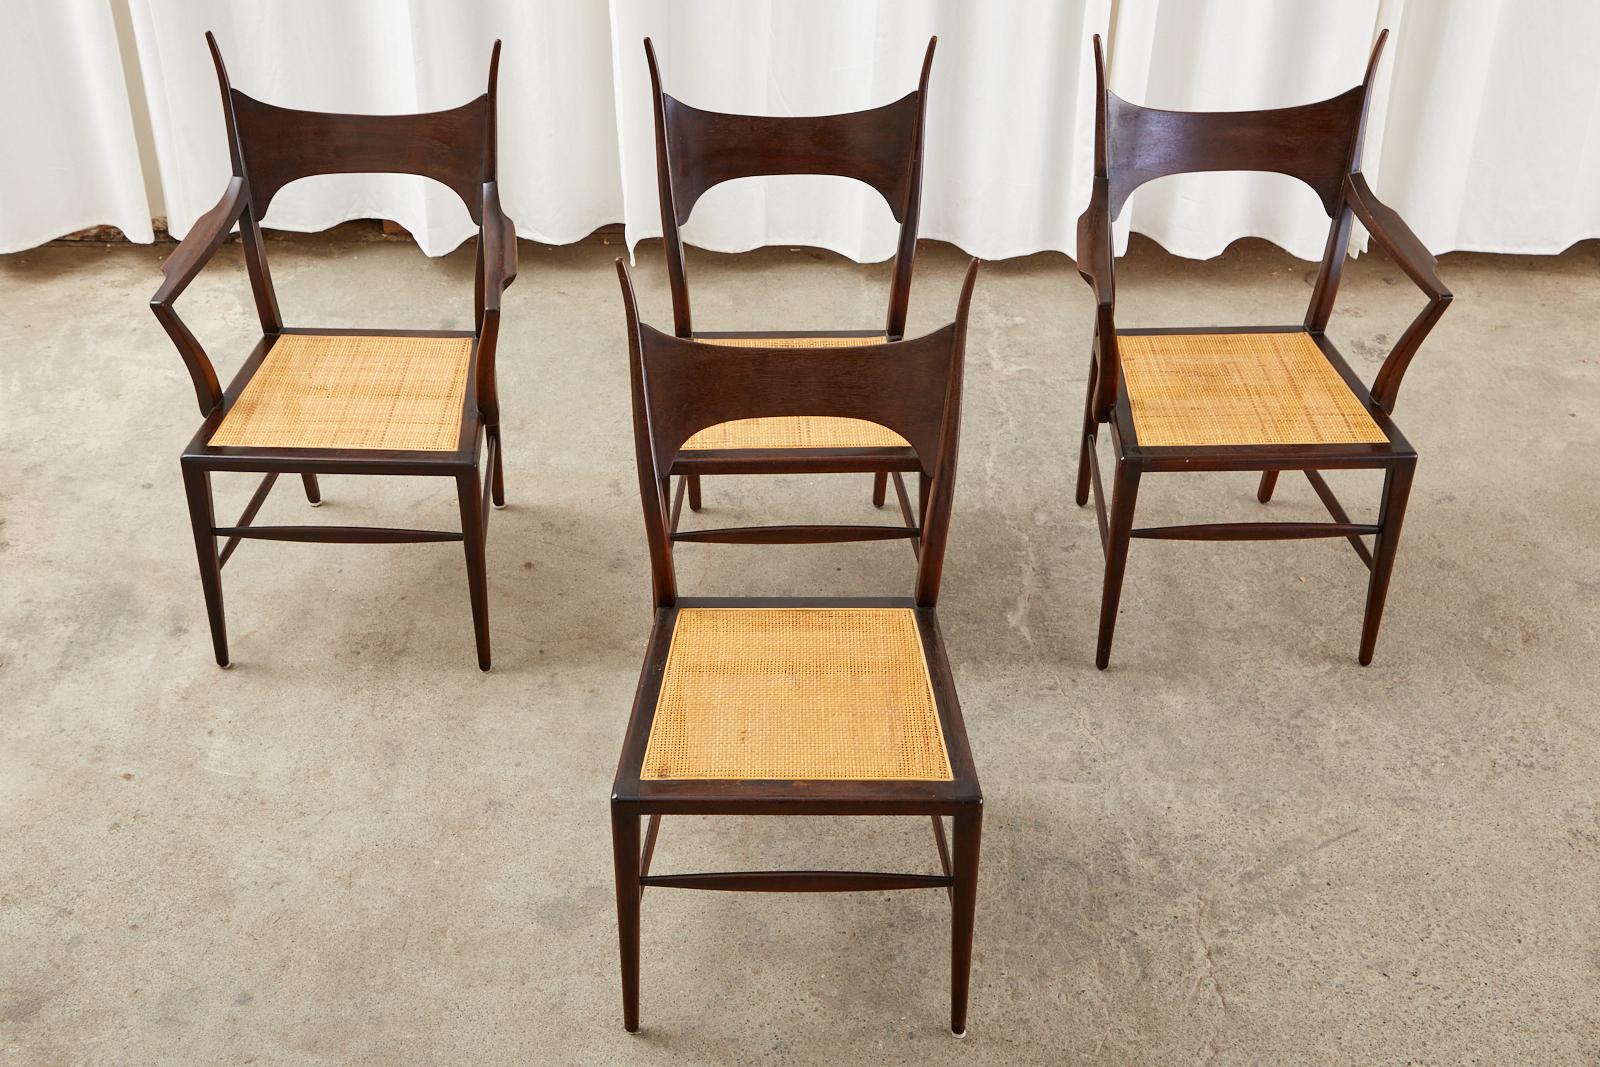 Set of Four Edward Wormley for Dunbar Horned Dining Chairs In Good Condition For Sale In Rio Vista, CA